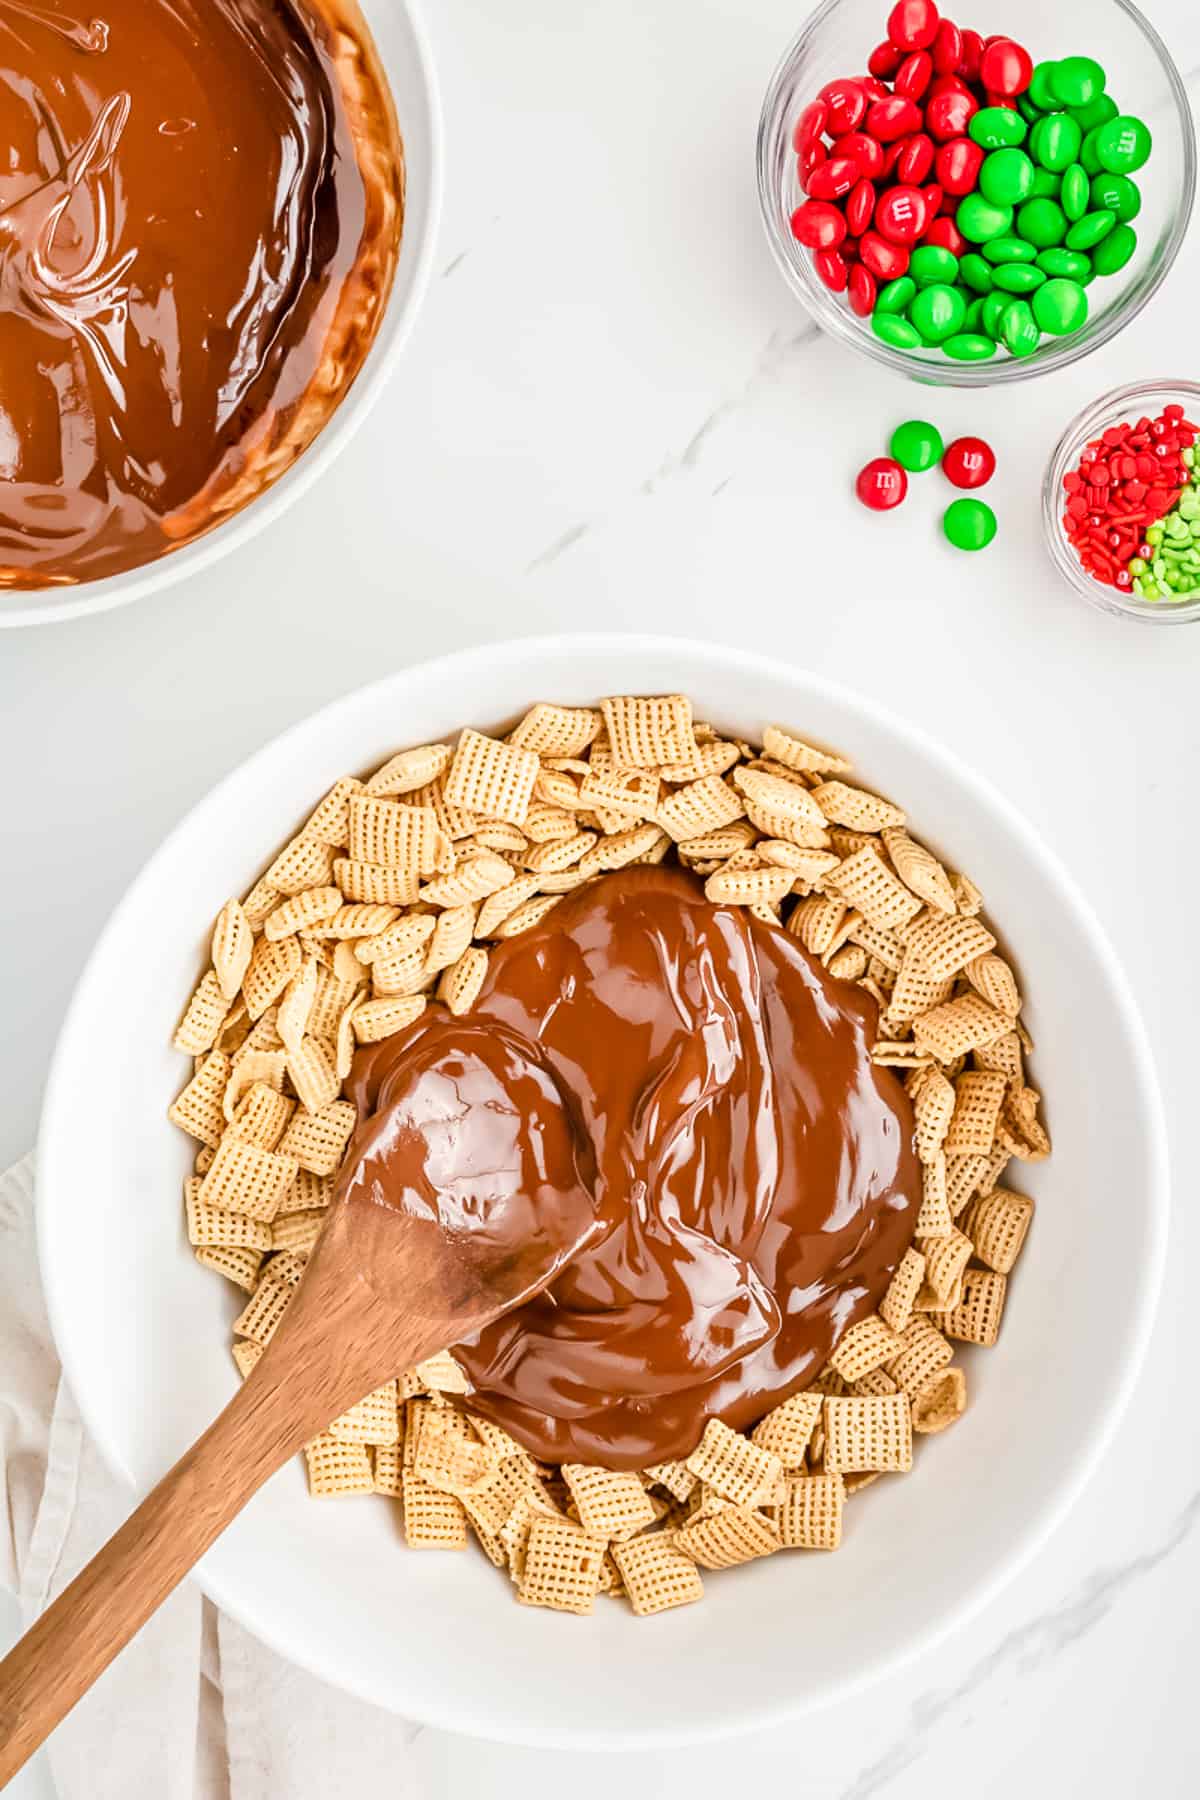 Half of the chocolate sauce being mixed into Chex cereal in a bowl on a counter with more chocolate sauce, M&Ms, and sprinkles nearby on the counter.